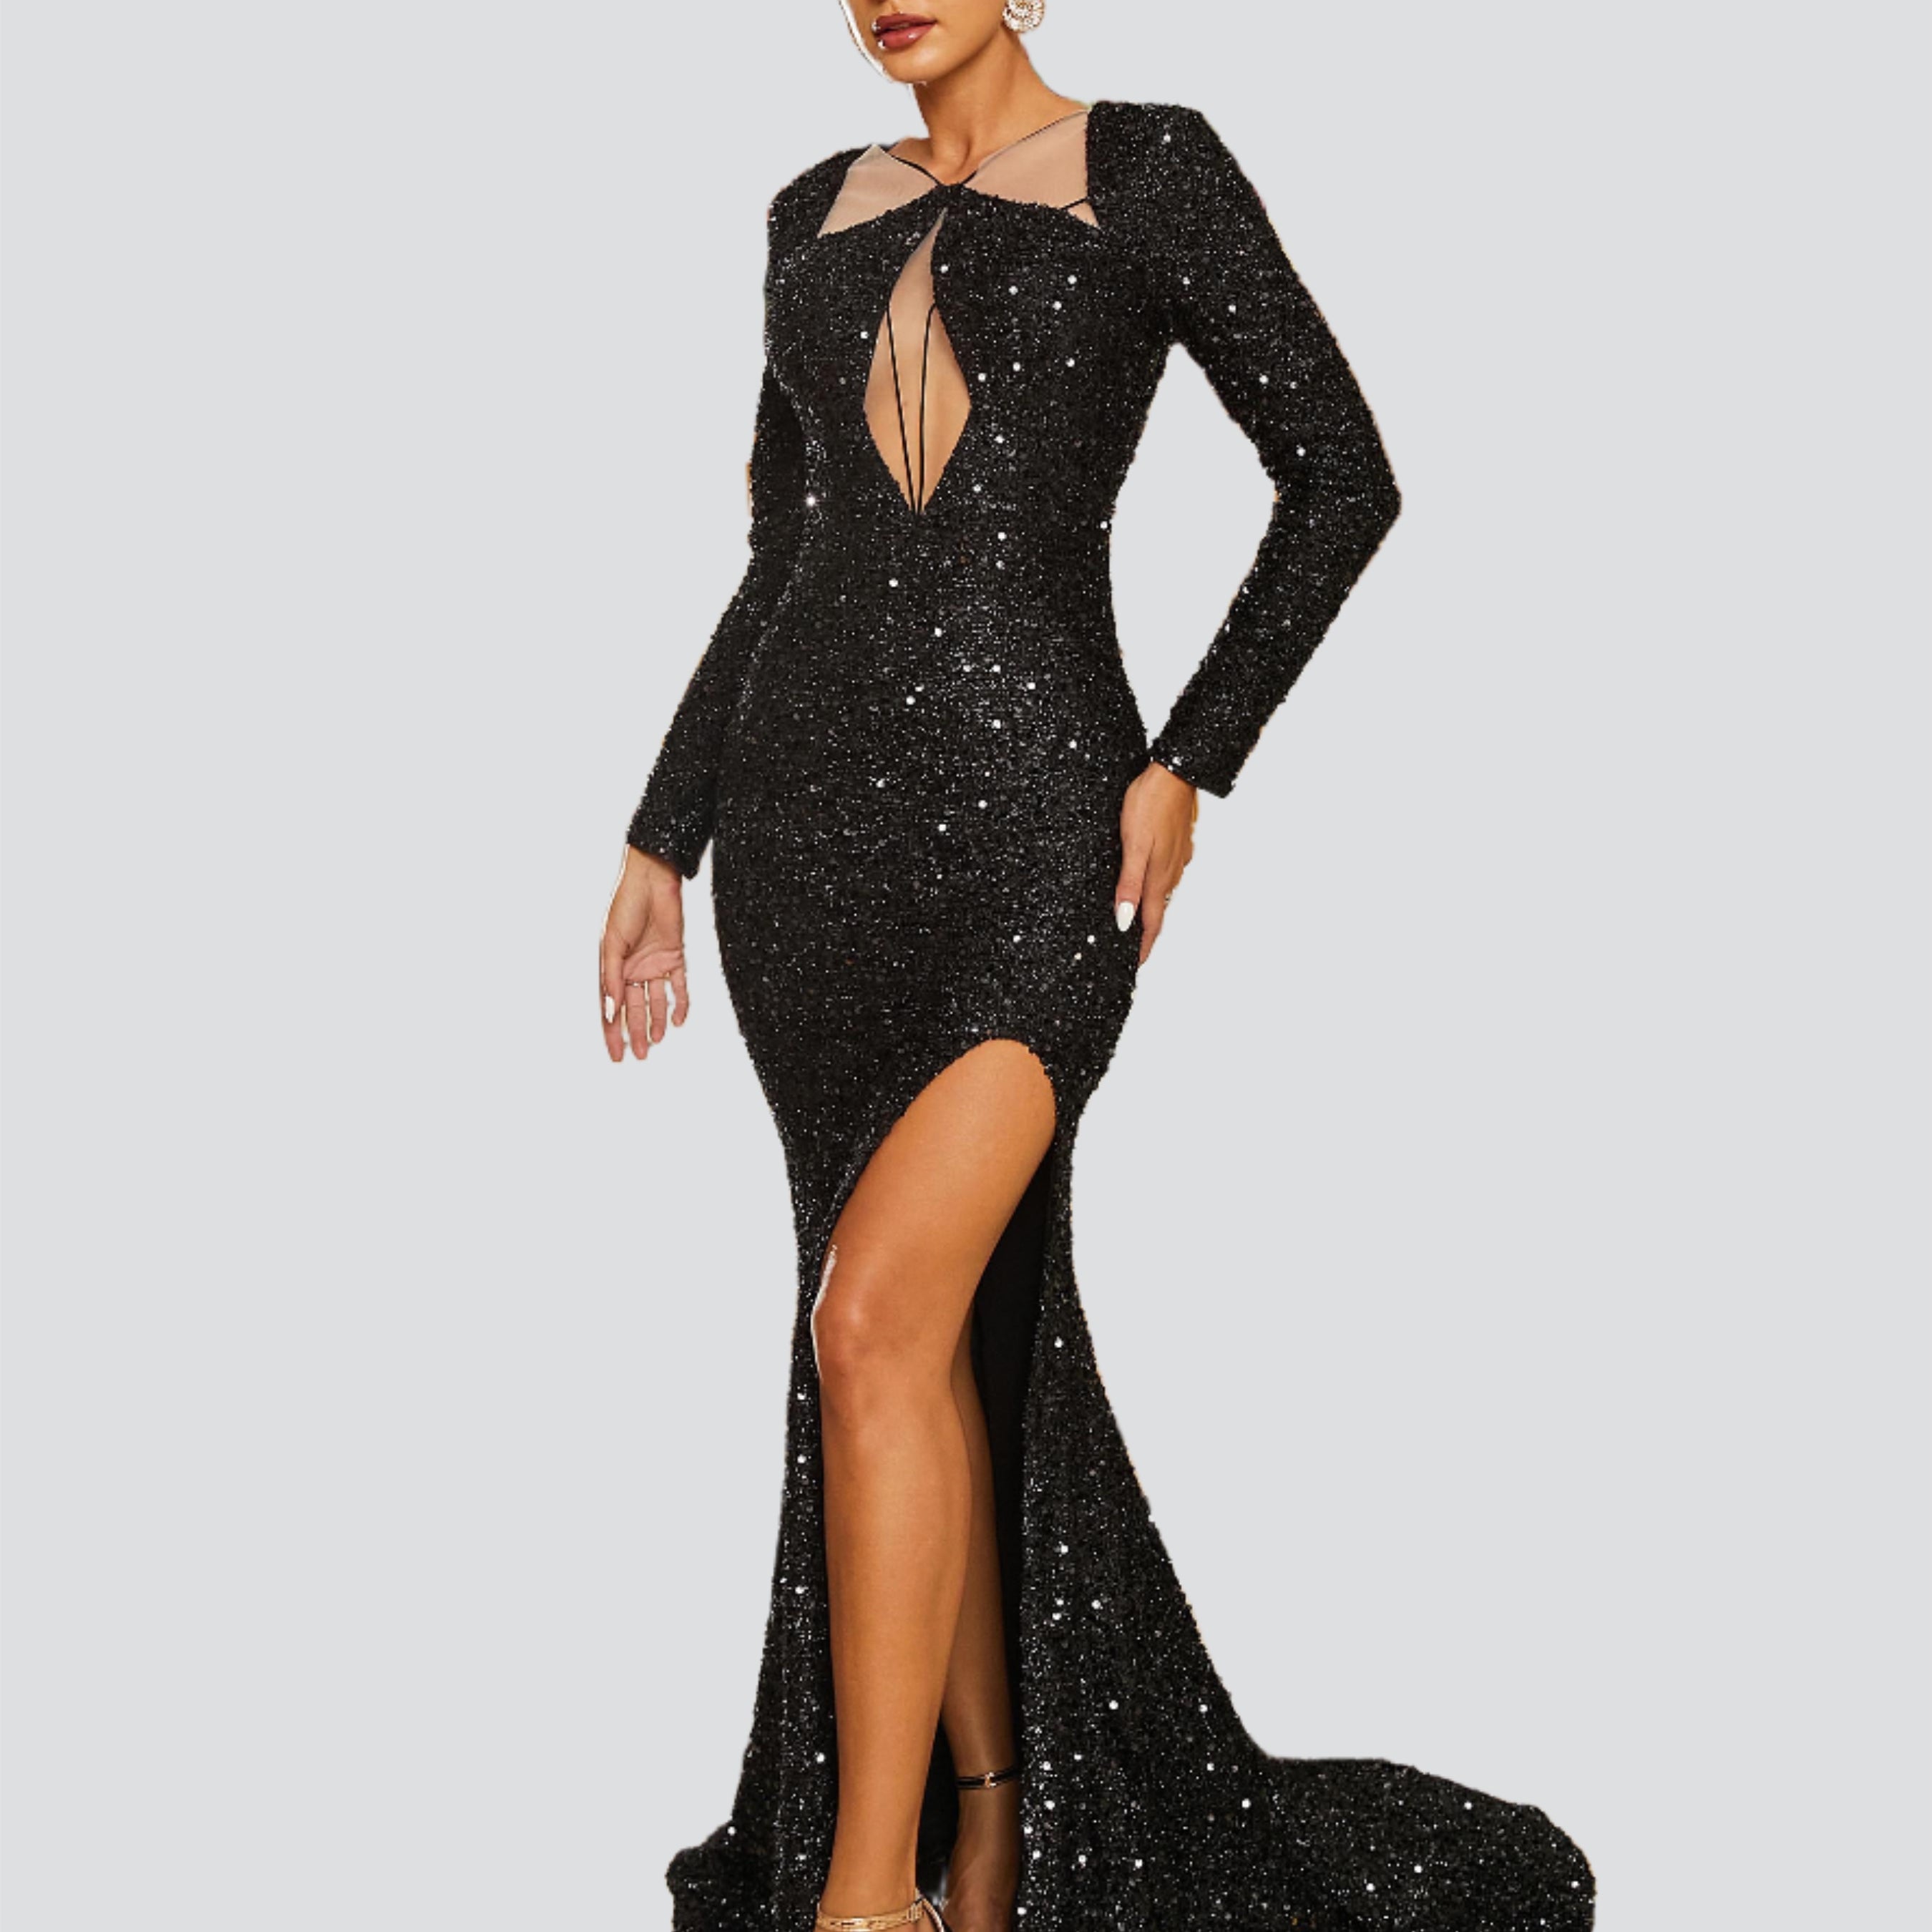 Formal Sexy Cut Out Sequin Black Evening Dress RJ10671